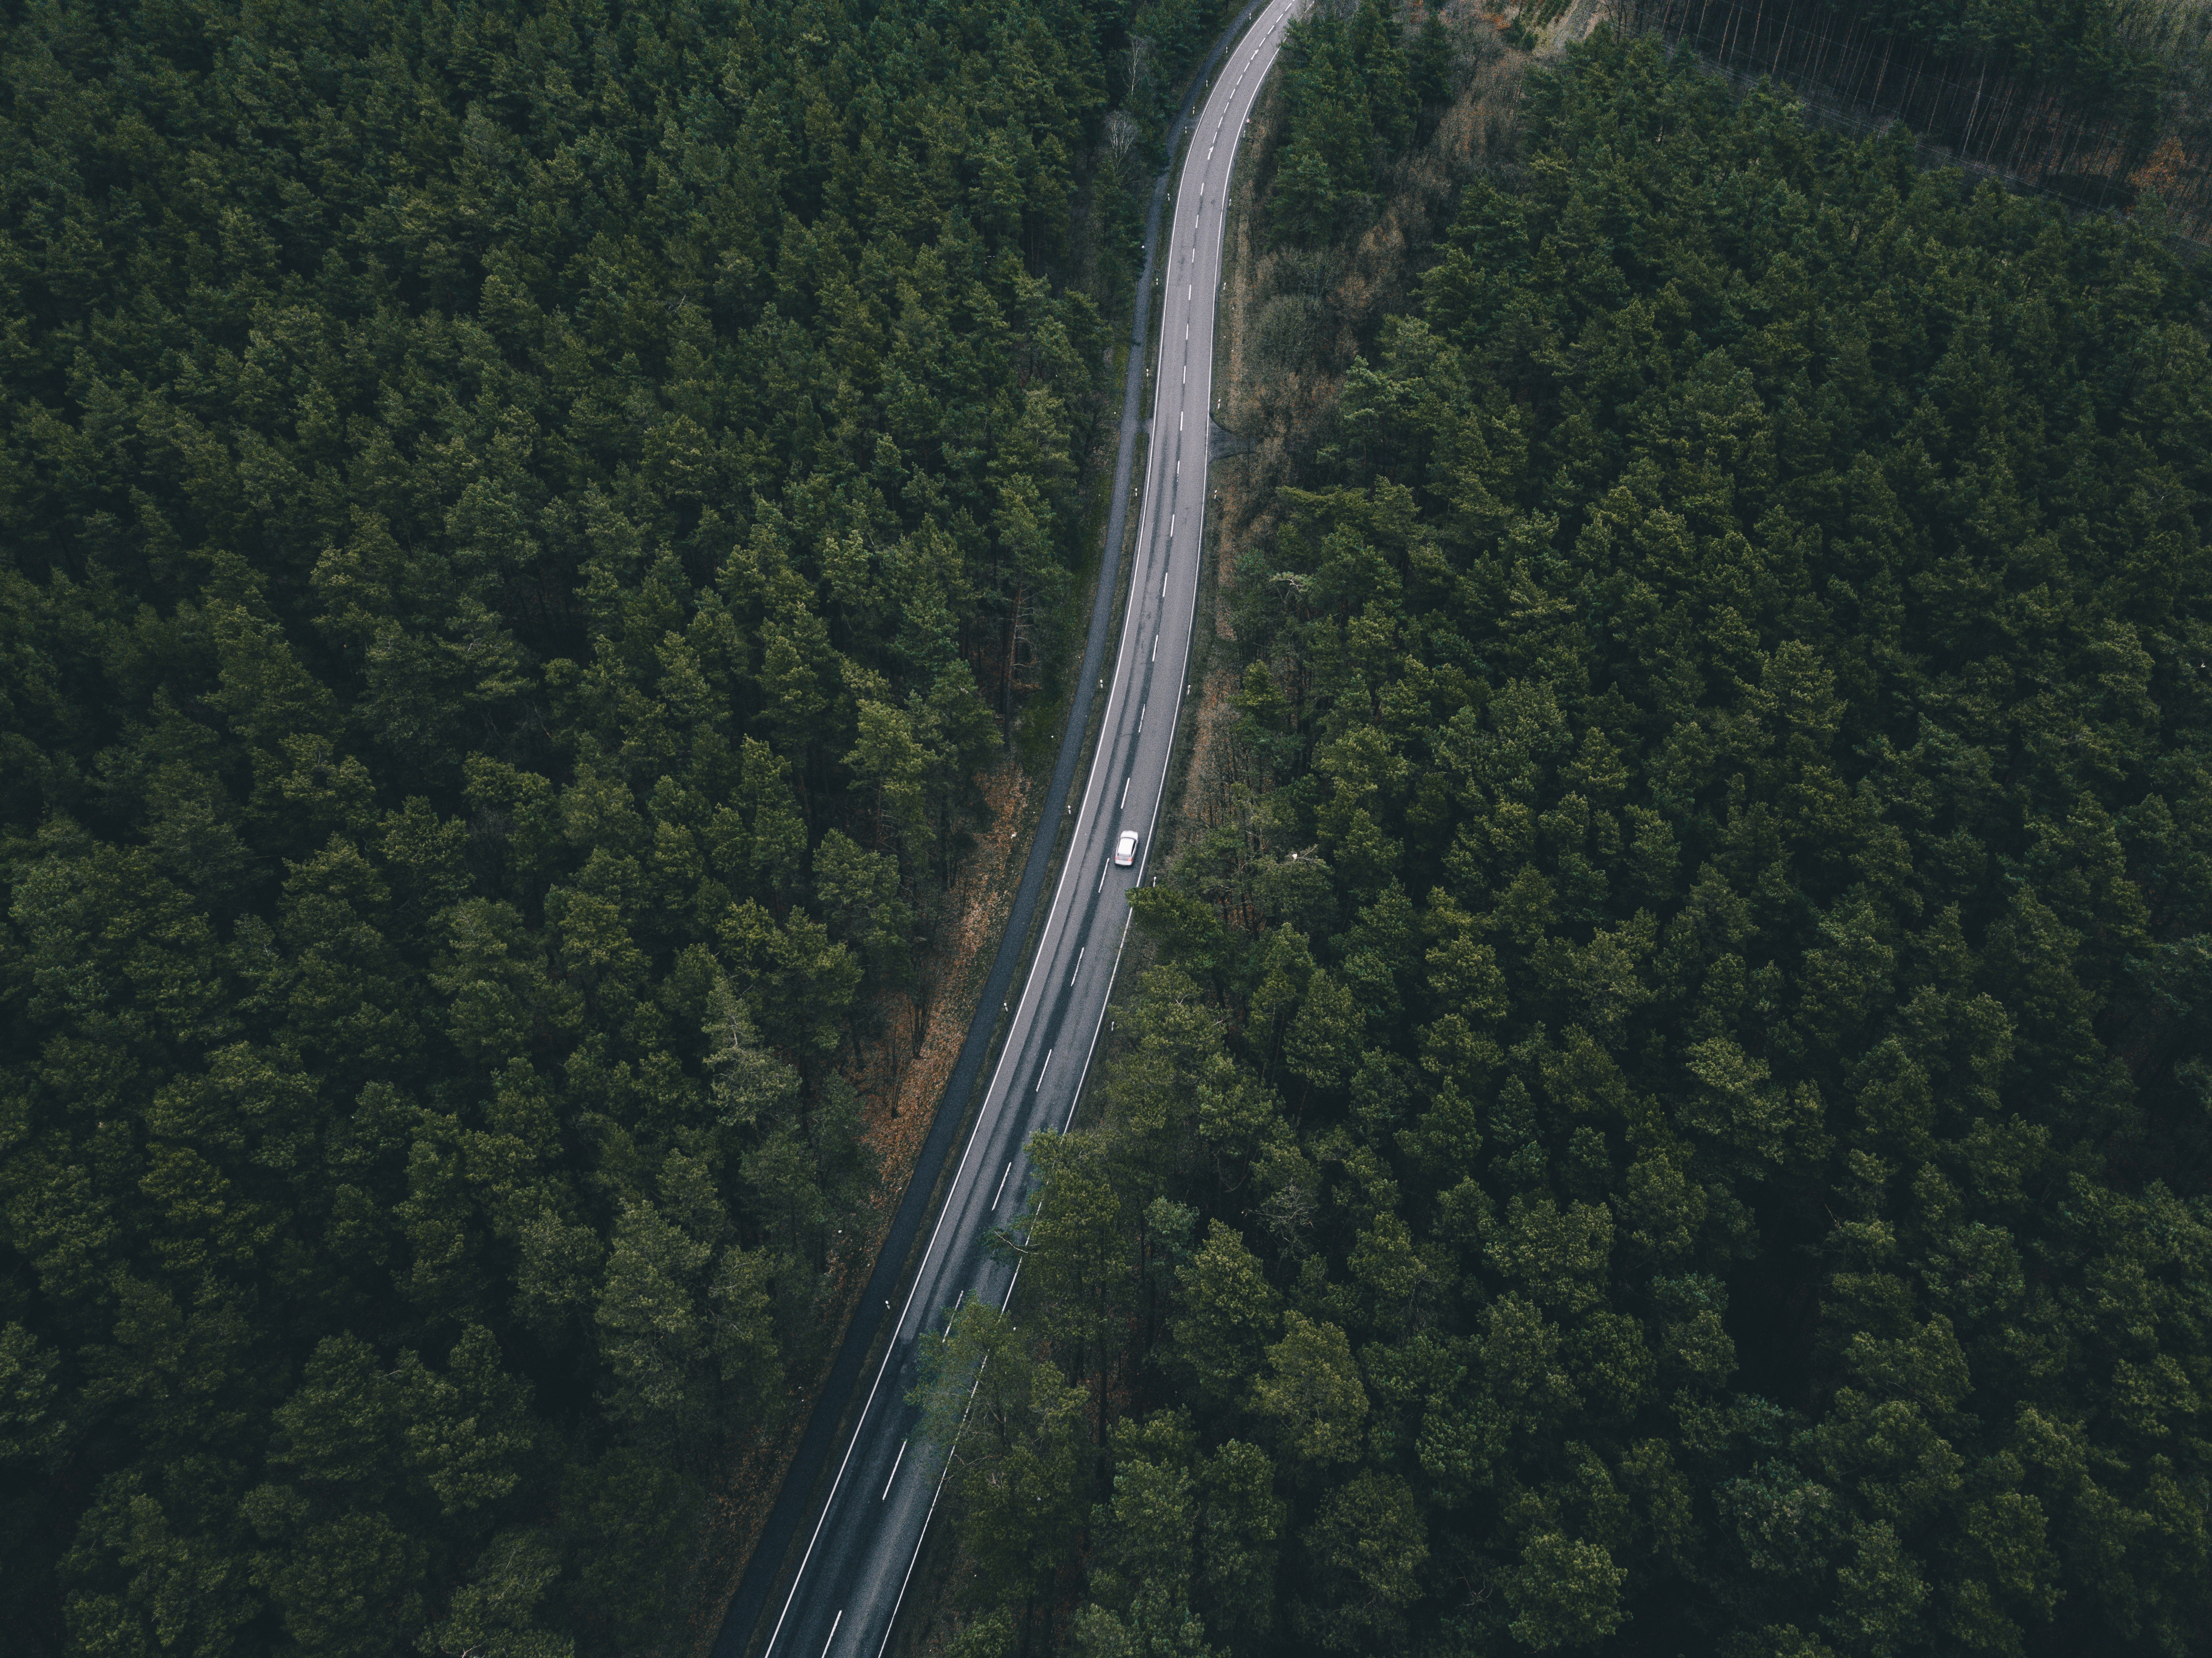 view from above, nature, trees, road 1080p